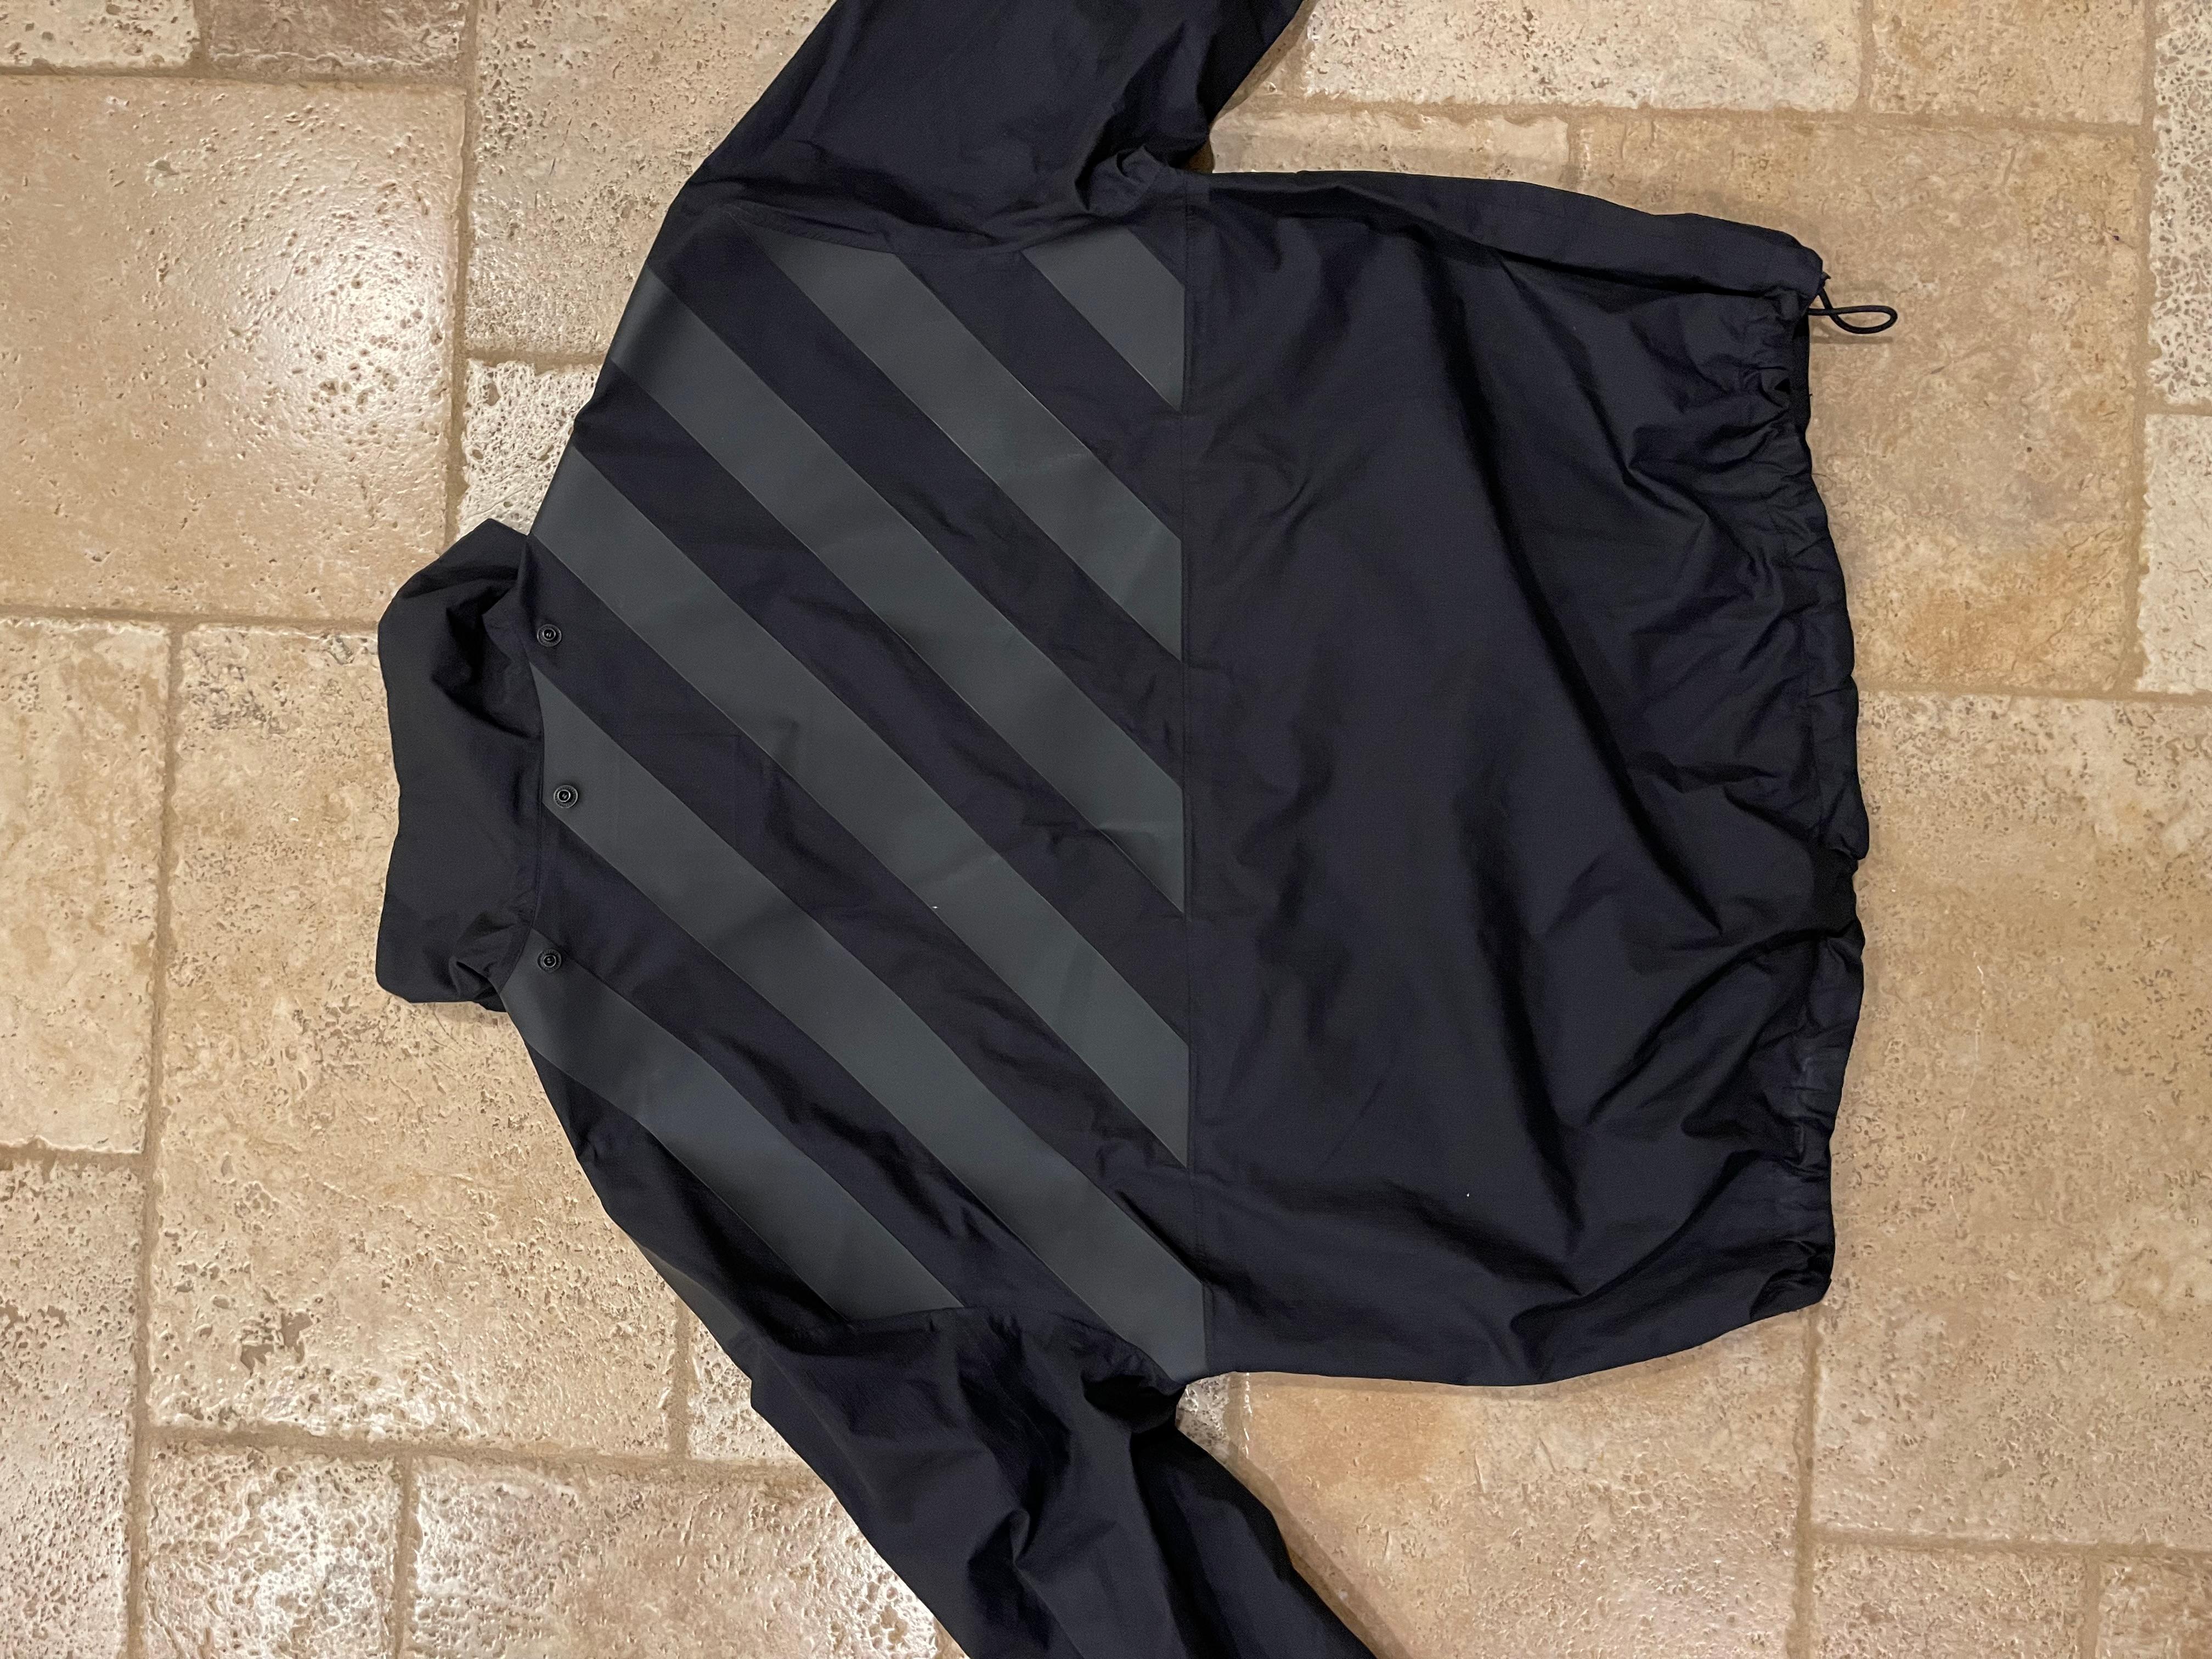 Moncler x Off White Donville Smock Black Windbreaker Jacket

Size 3

Great used condition (some small marks; could be removed easily by a dry clean)
Does not include the hood
Extremely rare Moncler x Off White OG collab piece. Grail piece
Retailed